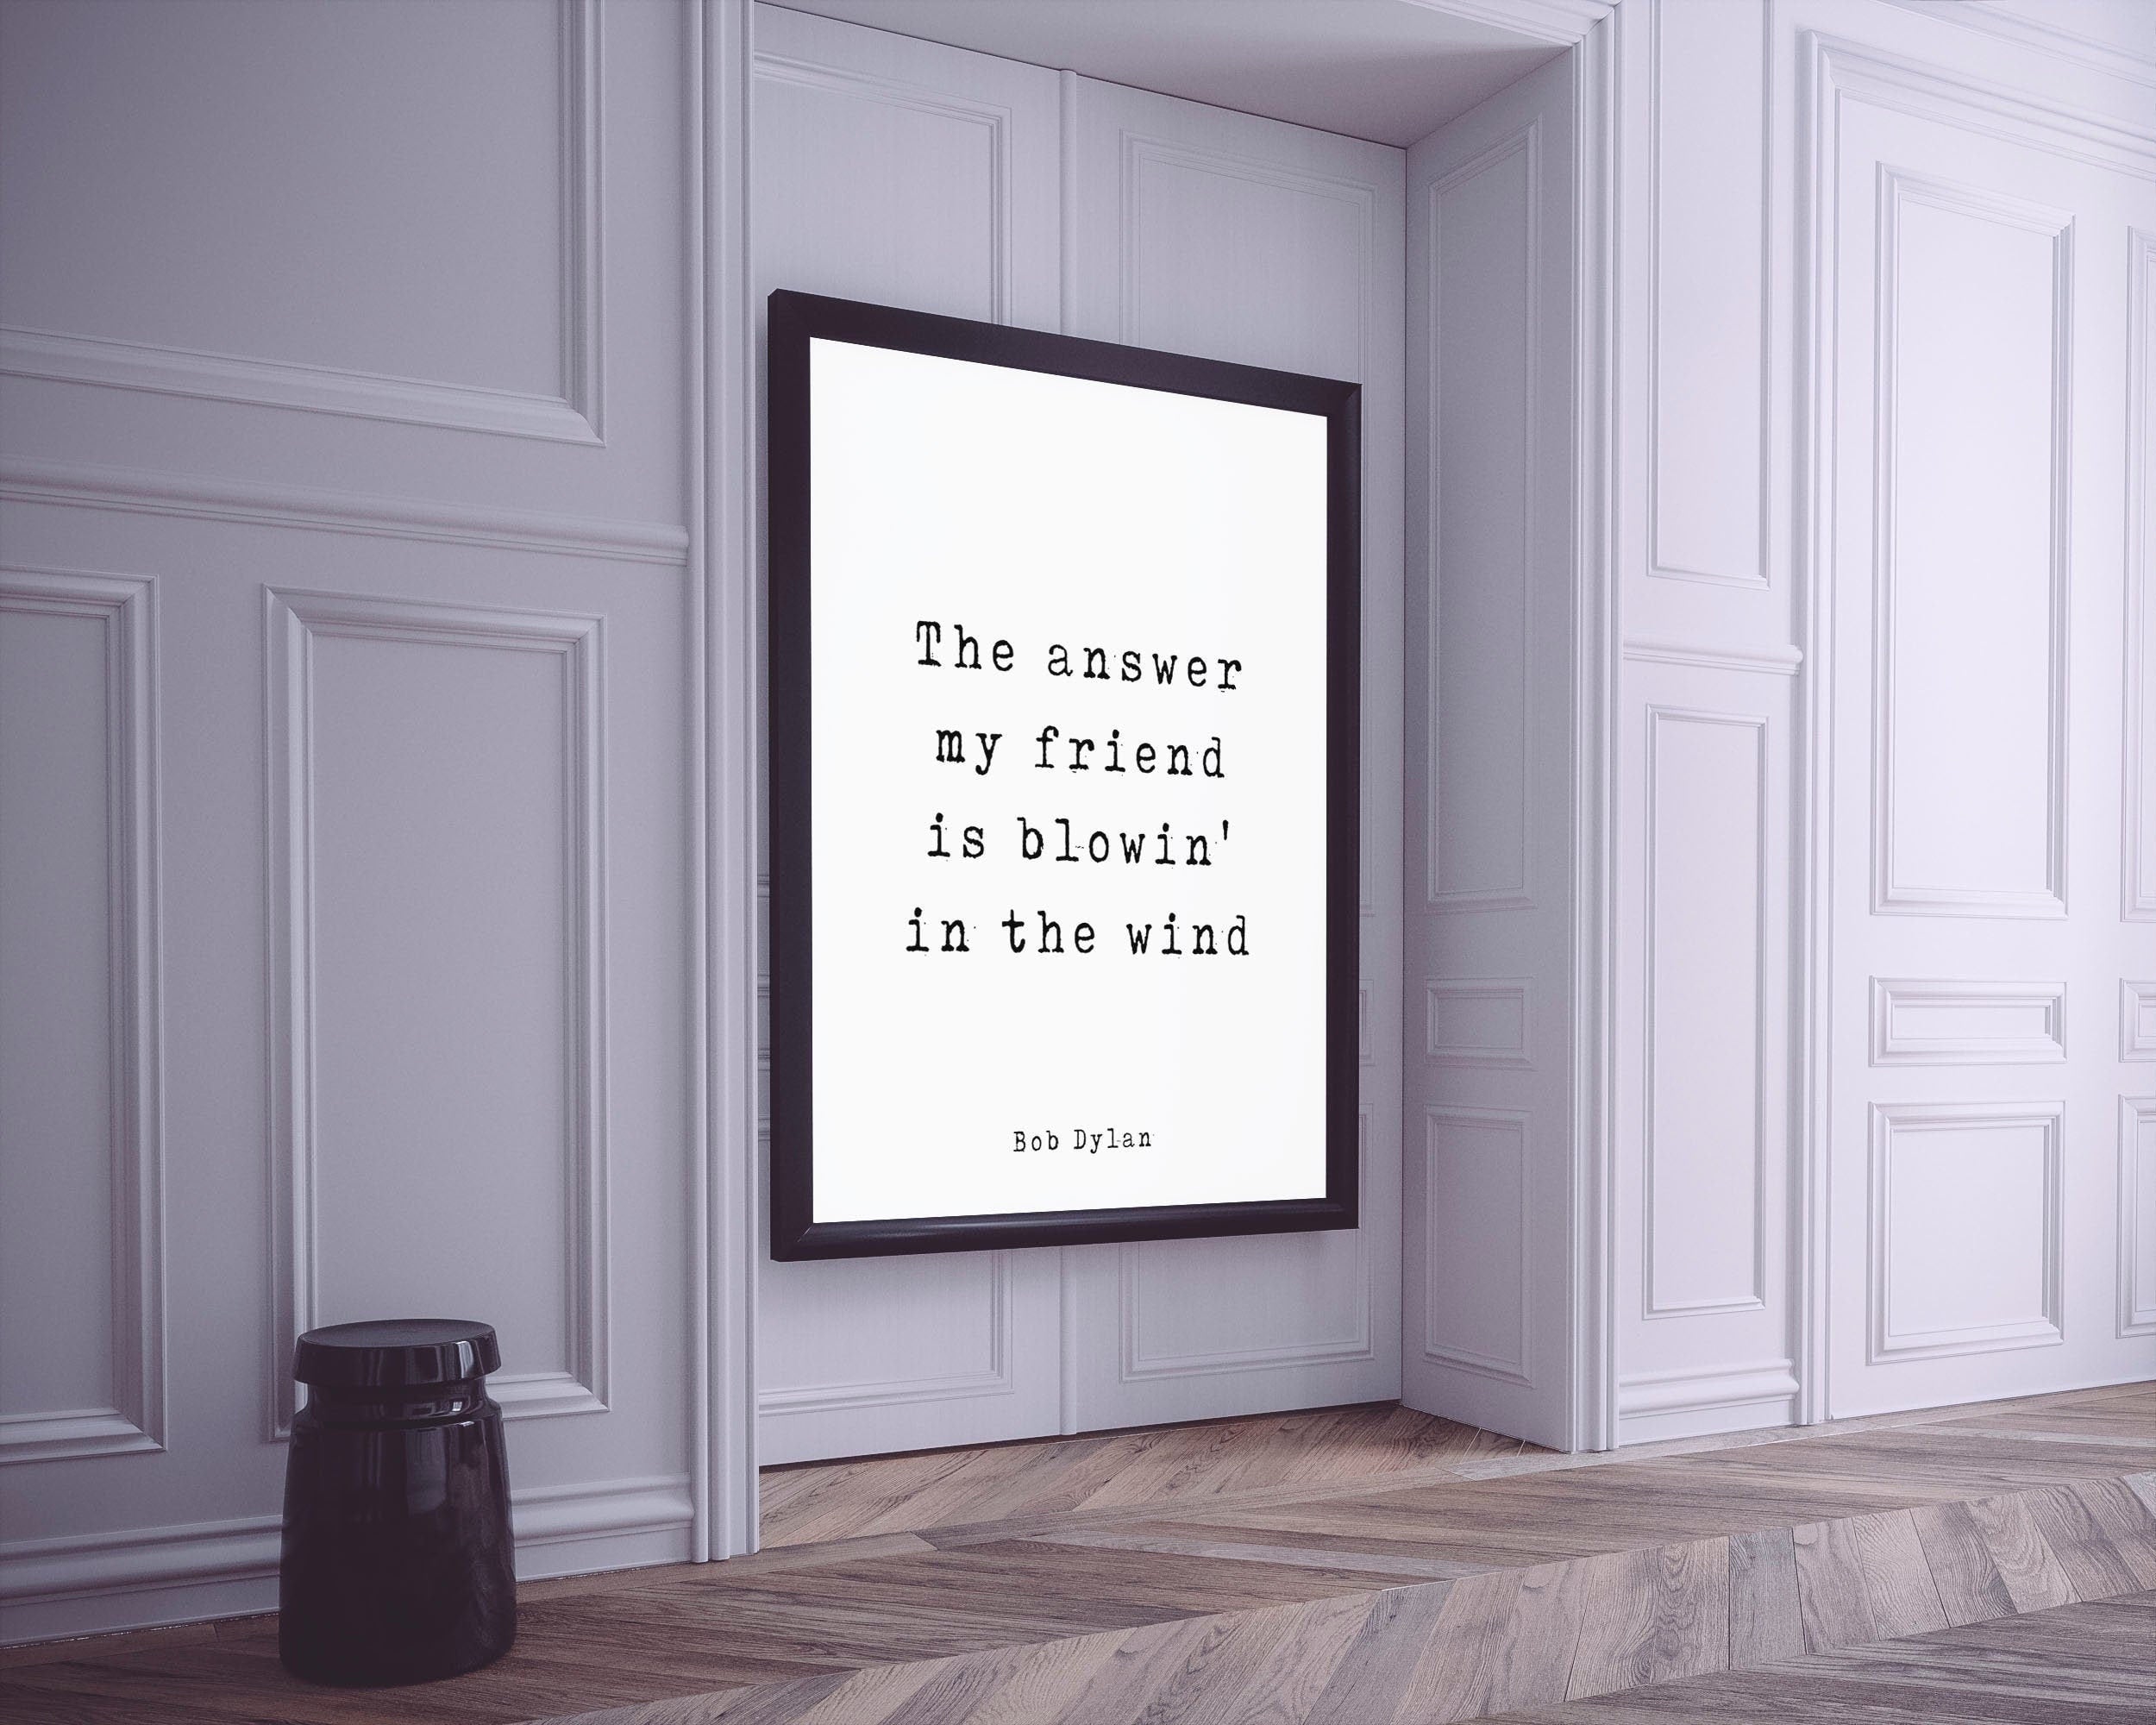 Bob Dylan quote print, The answer my friend is blowin' in the wind unframed black & white print